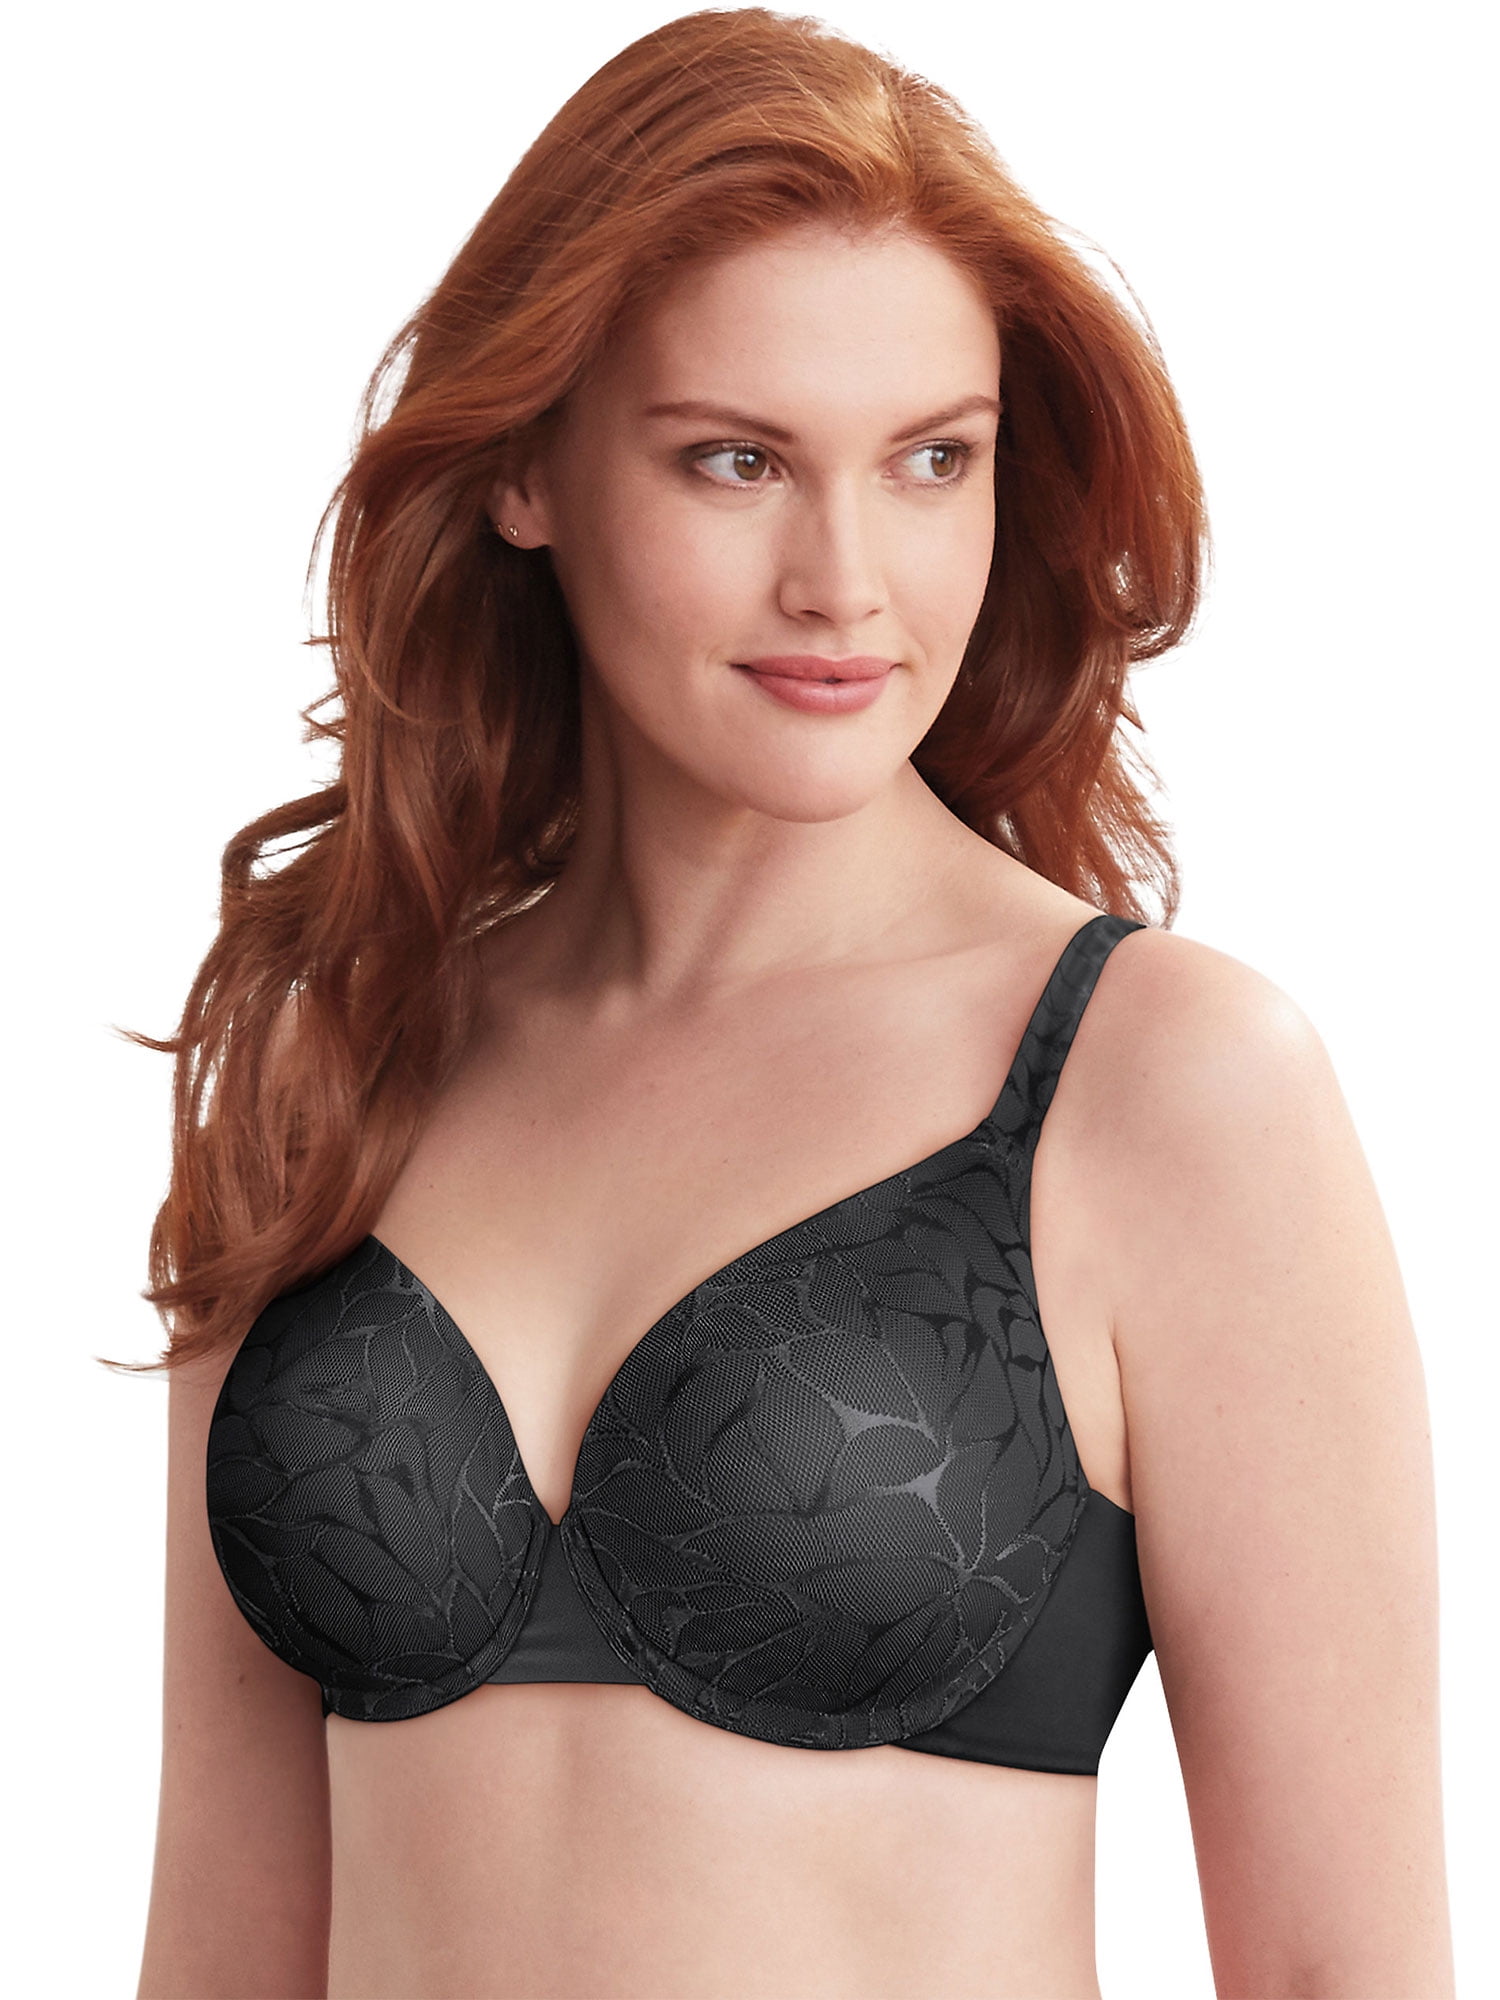 Bali Beauty Lift® Invisible Support Underwire Bra Nude 34D Women's 